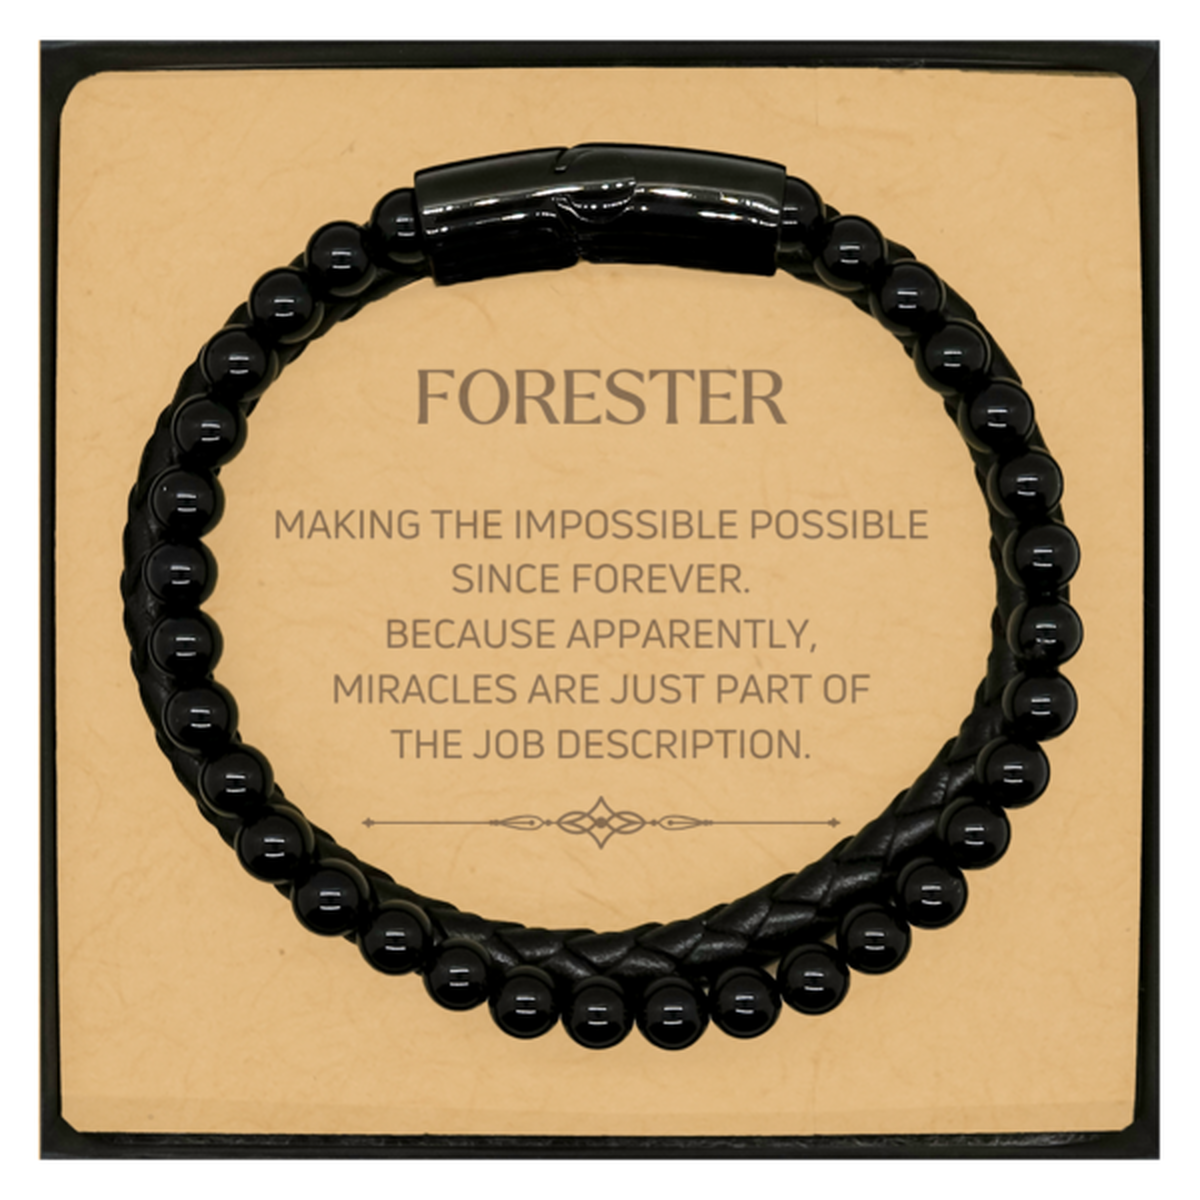 Funny Forester Gifts, Miracles are just part of the job description, Inspirational Birthday Christmas Stone Leather Bracelets For Forester, Men, Women, Coworkers, Friends, Boss